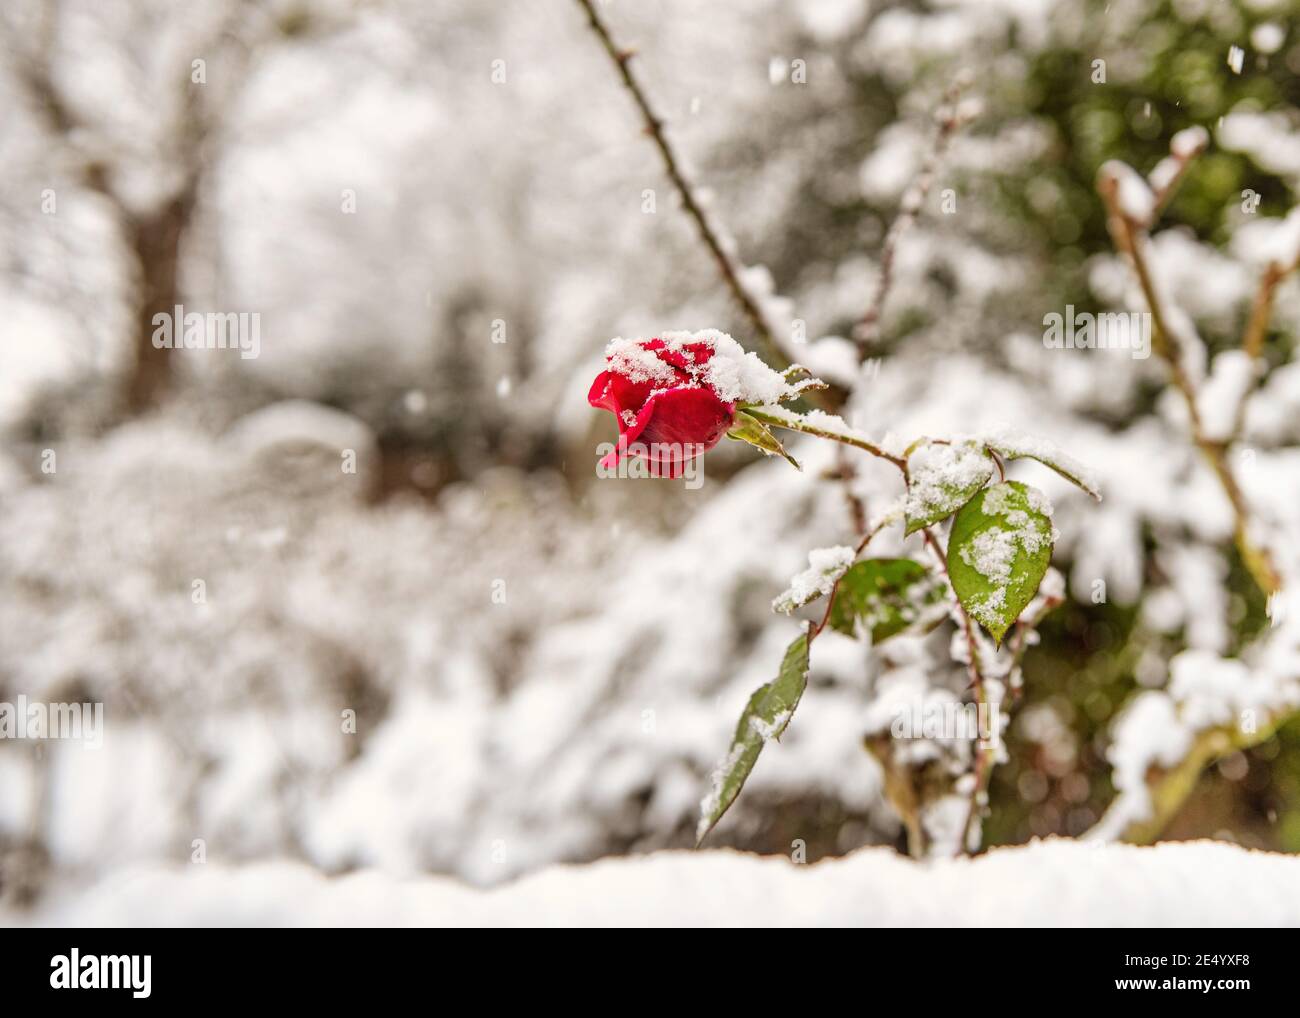 Red rose covered with snow in a frosty winter day, Harrow on the Hill, England Stock Photo